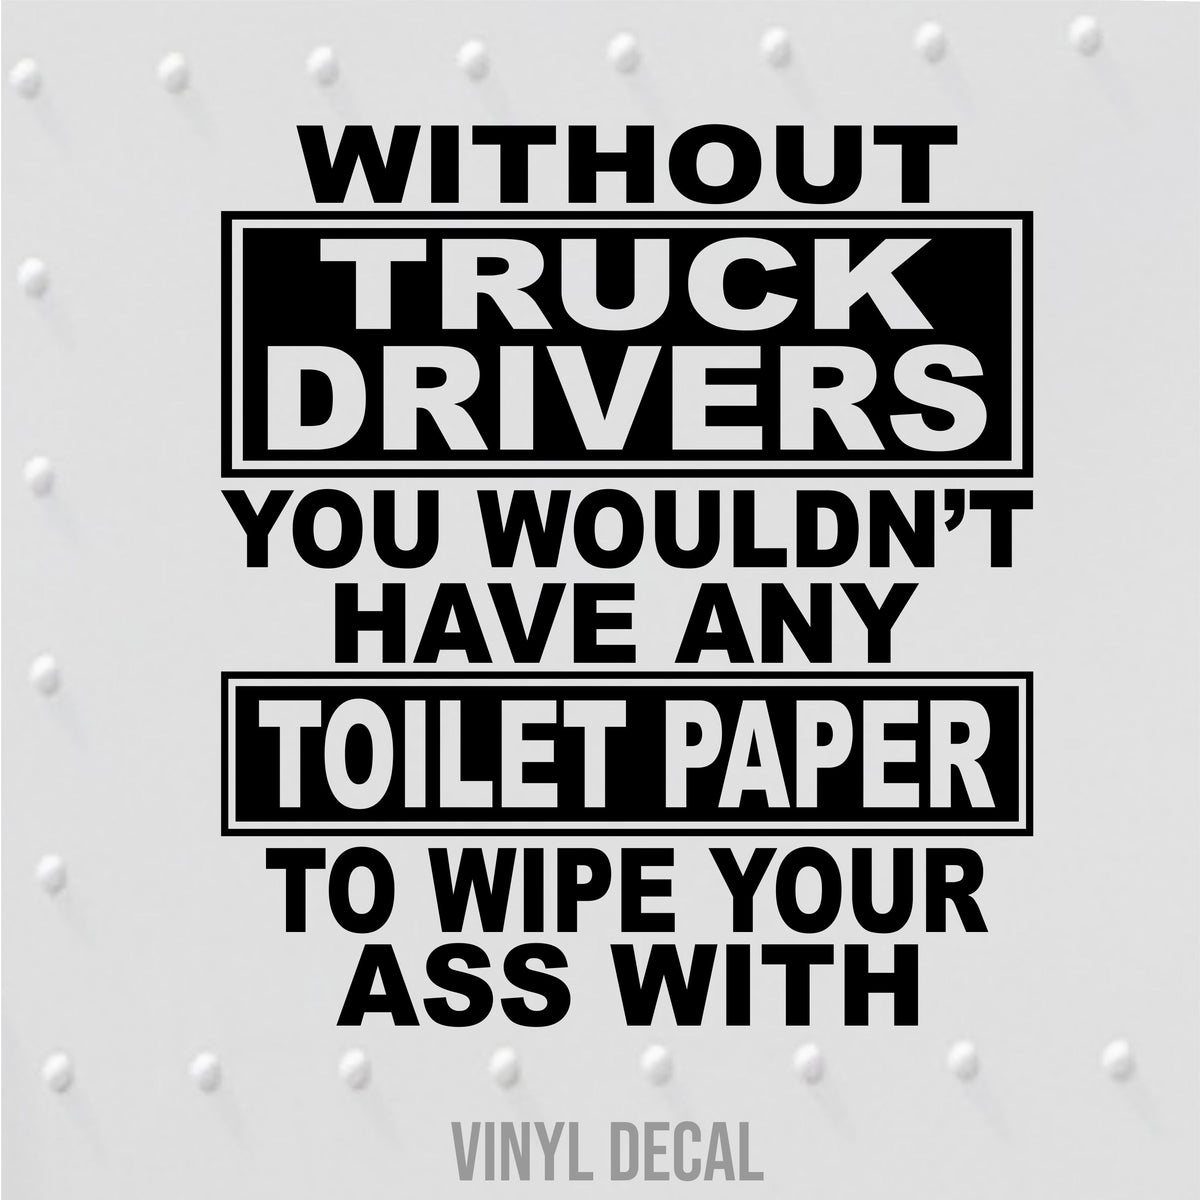 Without Truck Drivers You Wouldn't Have Any Toilet Paper Vinyl Decal Free Shipping